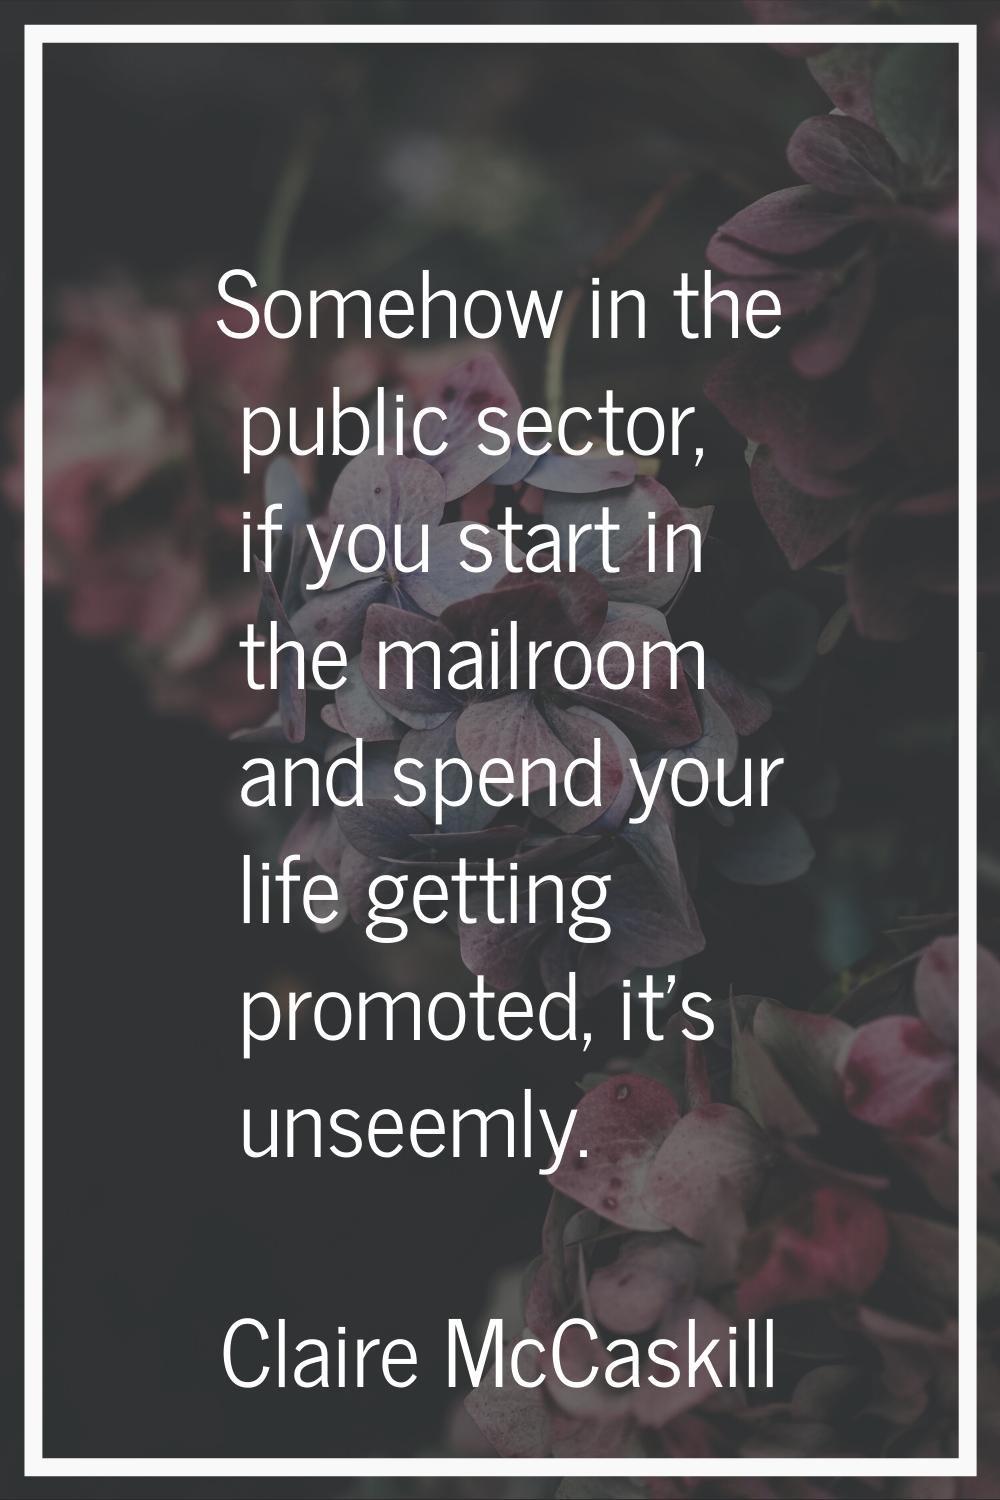 Somehow in the public sector, if you start in the mailroom and spend your life getting promoted, it